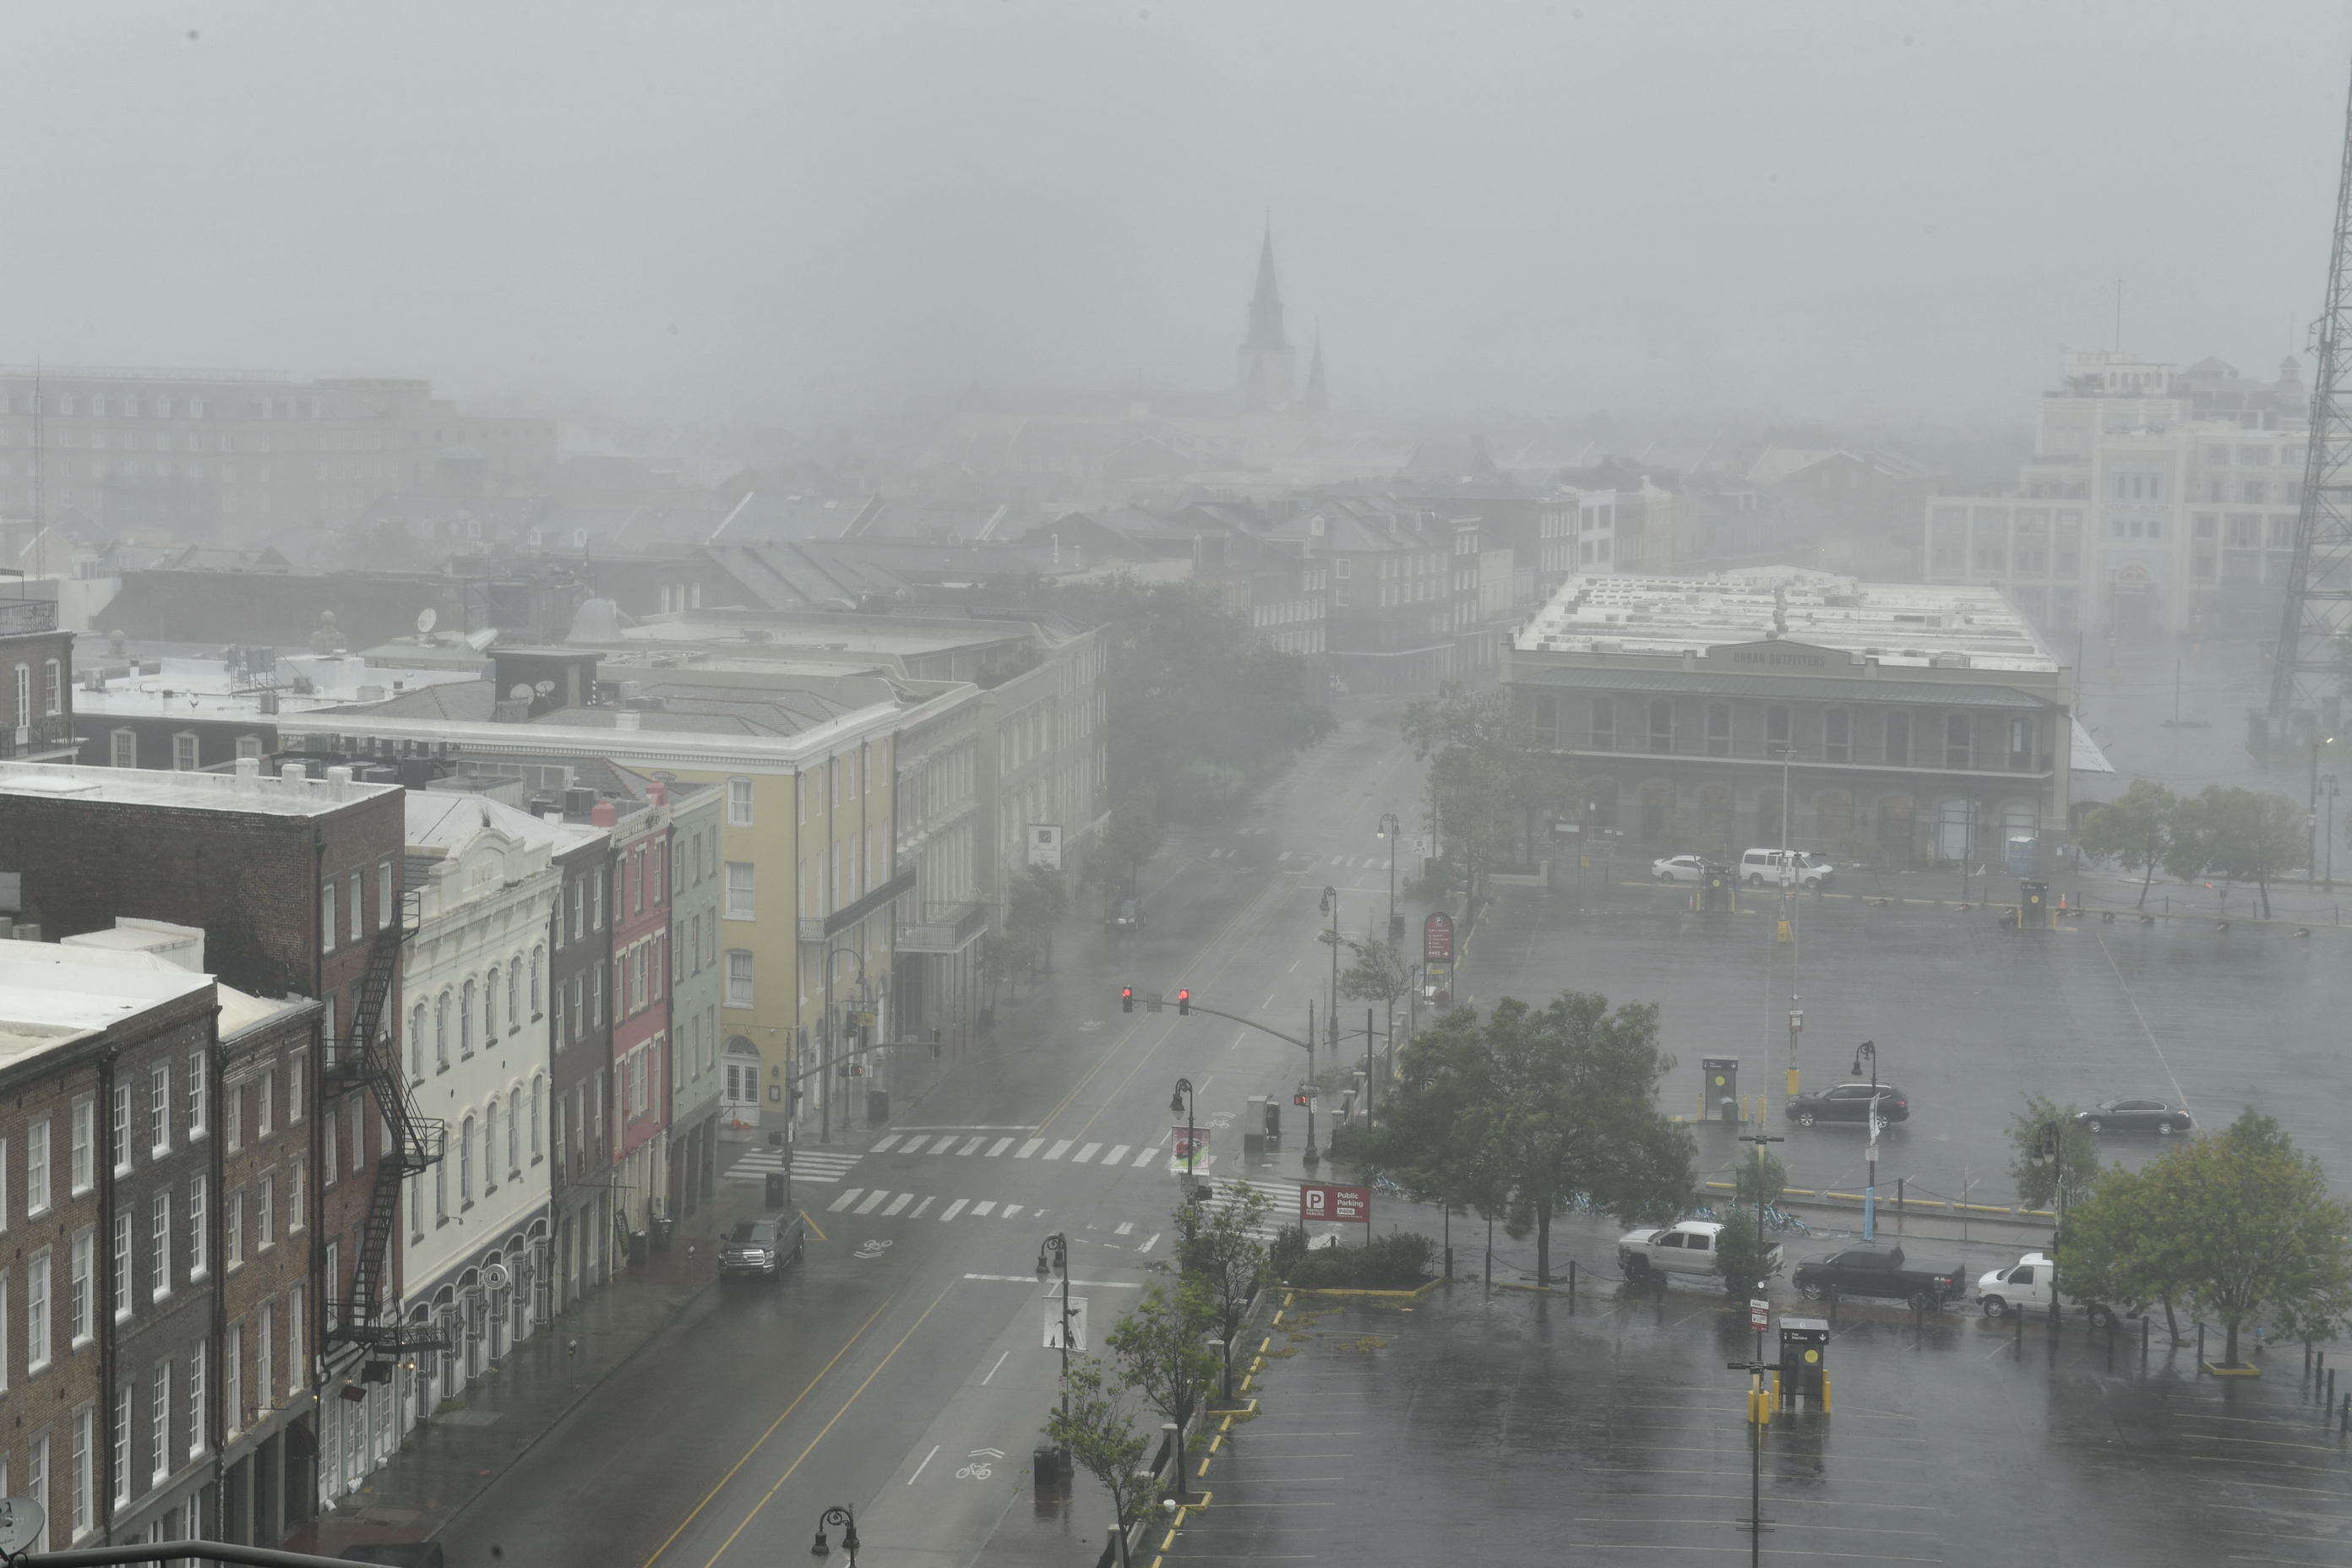 Rain batters Canal Street in New Orleans, on Sunday, August 29.